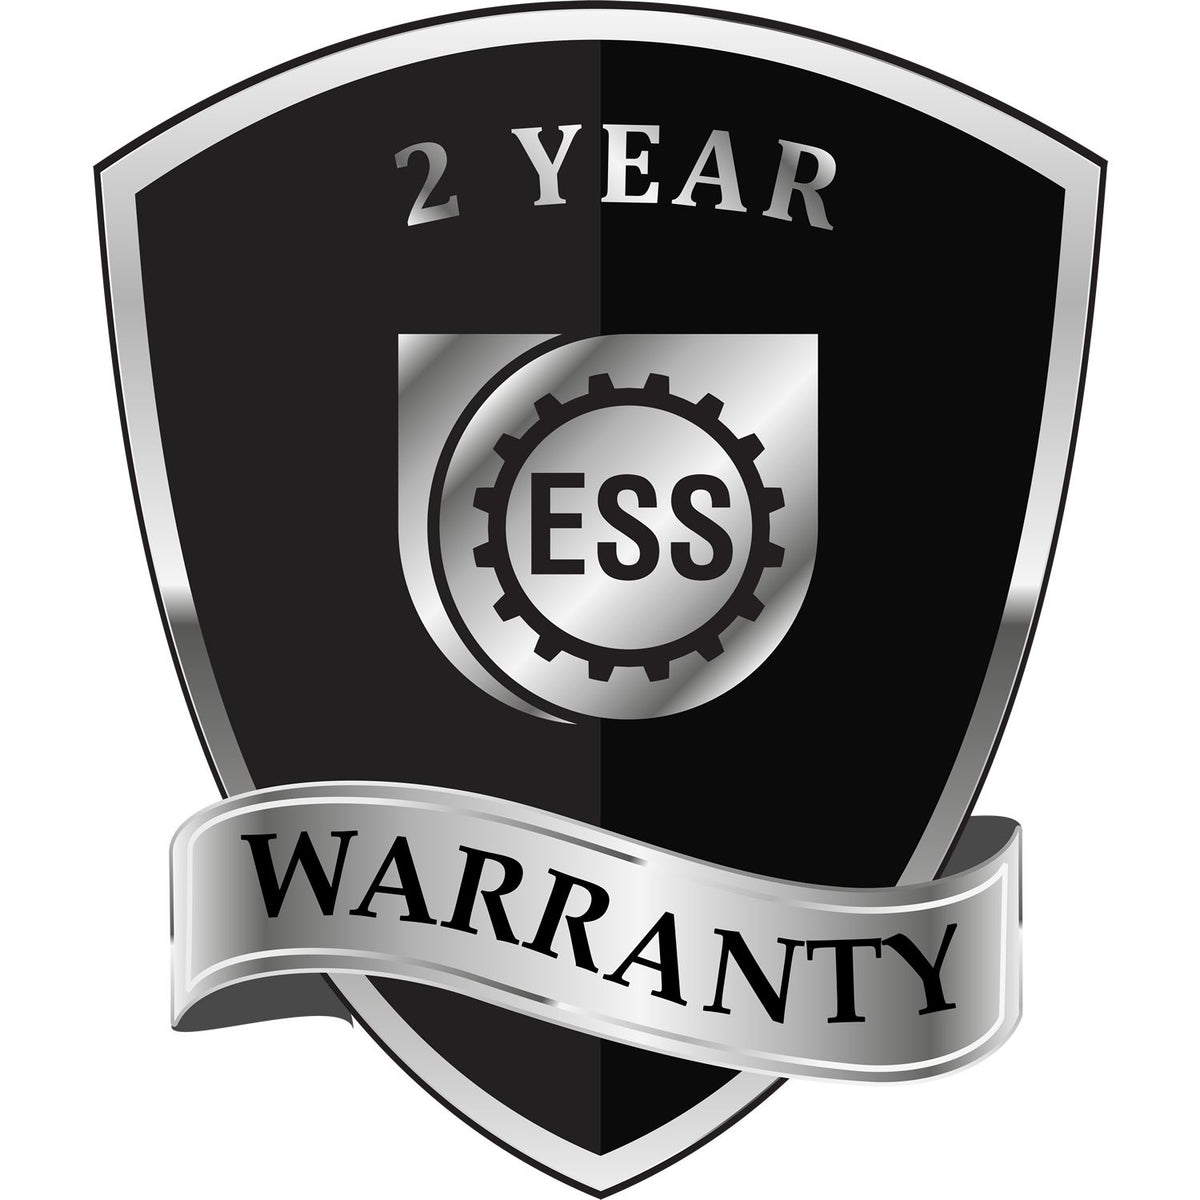 A badge or emblem showing a warranty icon for the Heavy Duty Cast Iron Delaware Engineer Seal Embosser